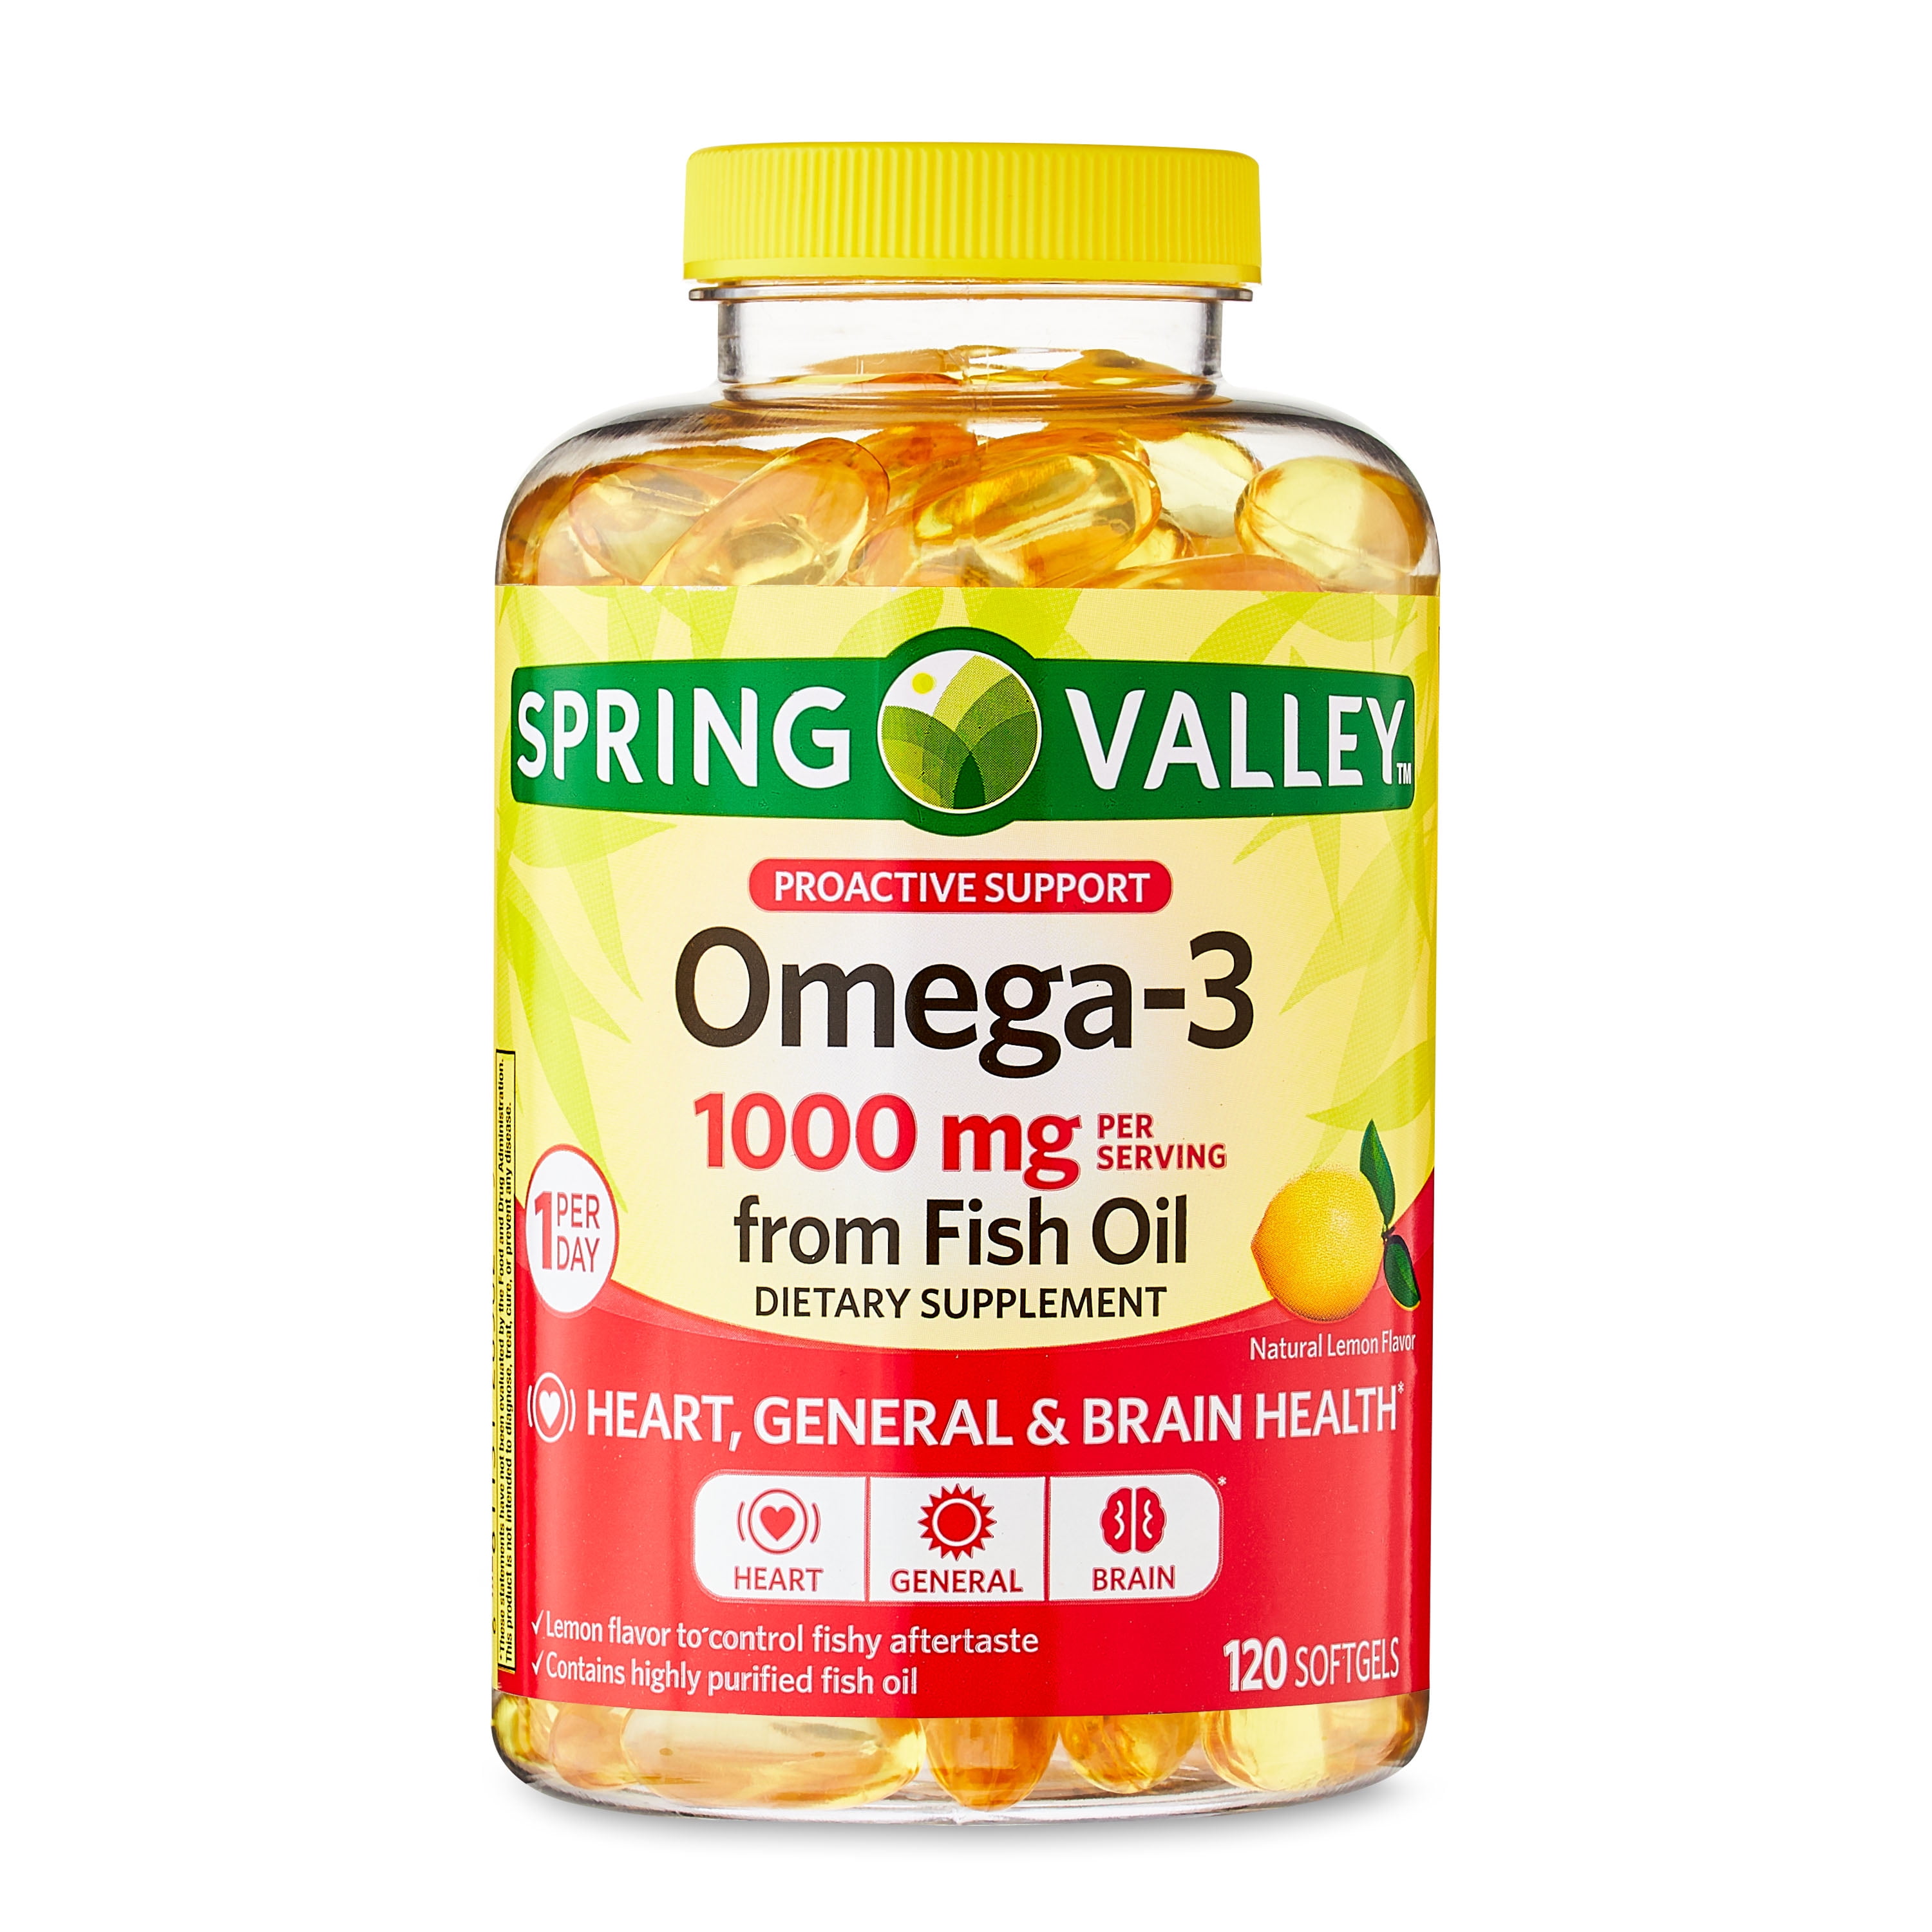 Spring Valley Omega-3 Fish Oil Soft Gels, 1000 mg, 120 Count